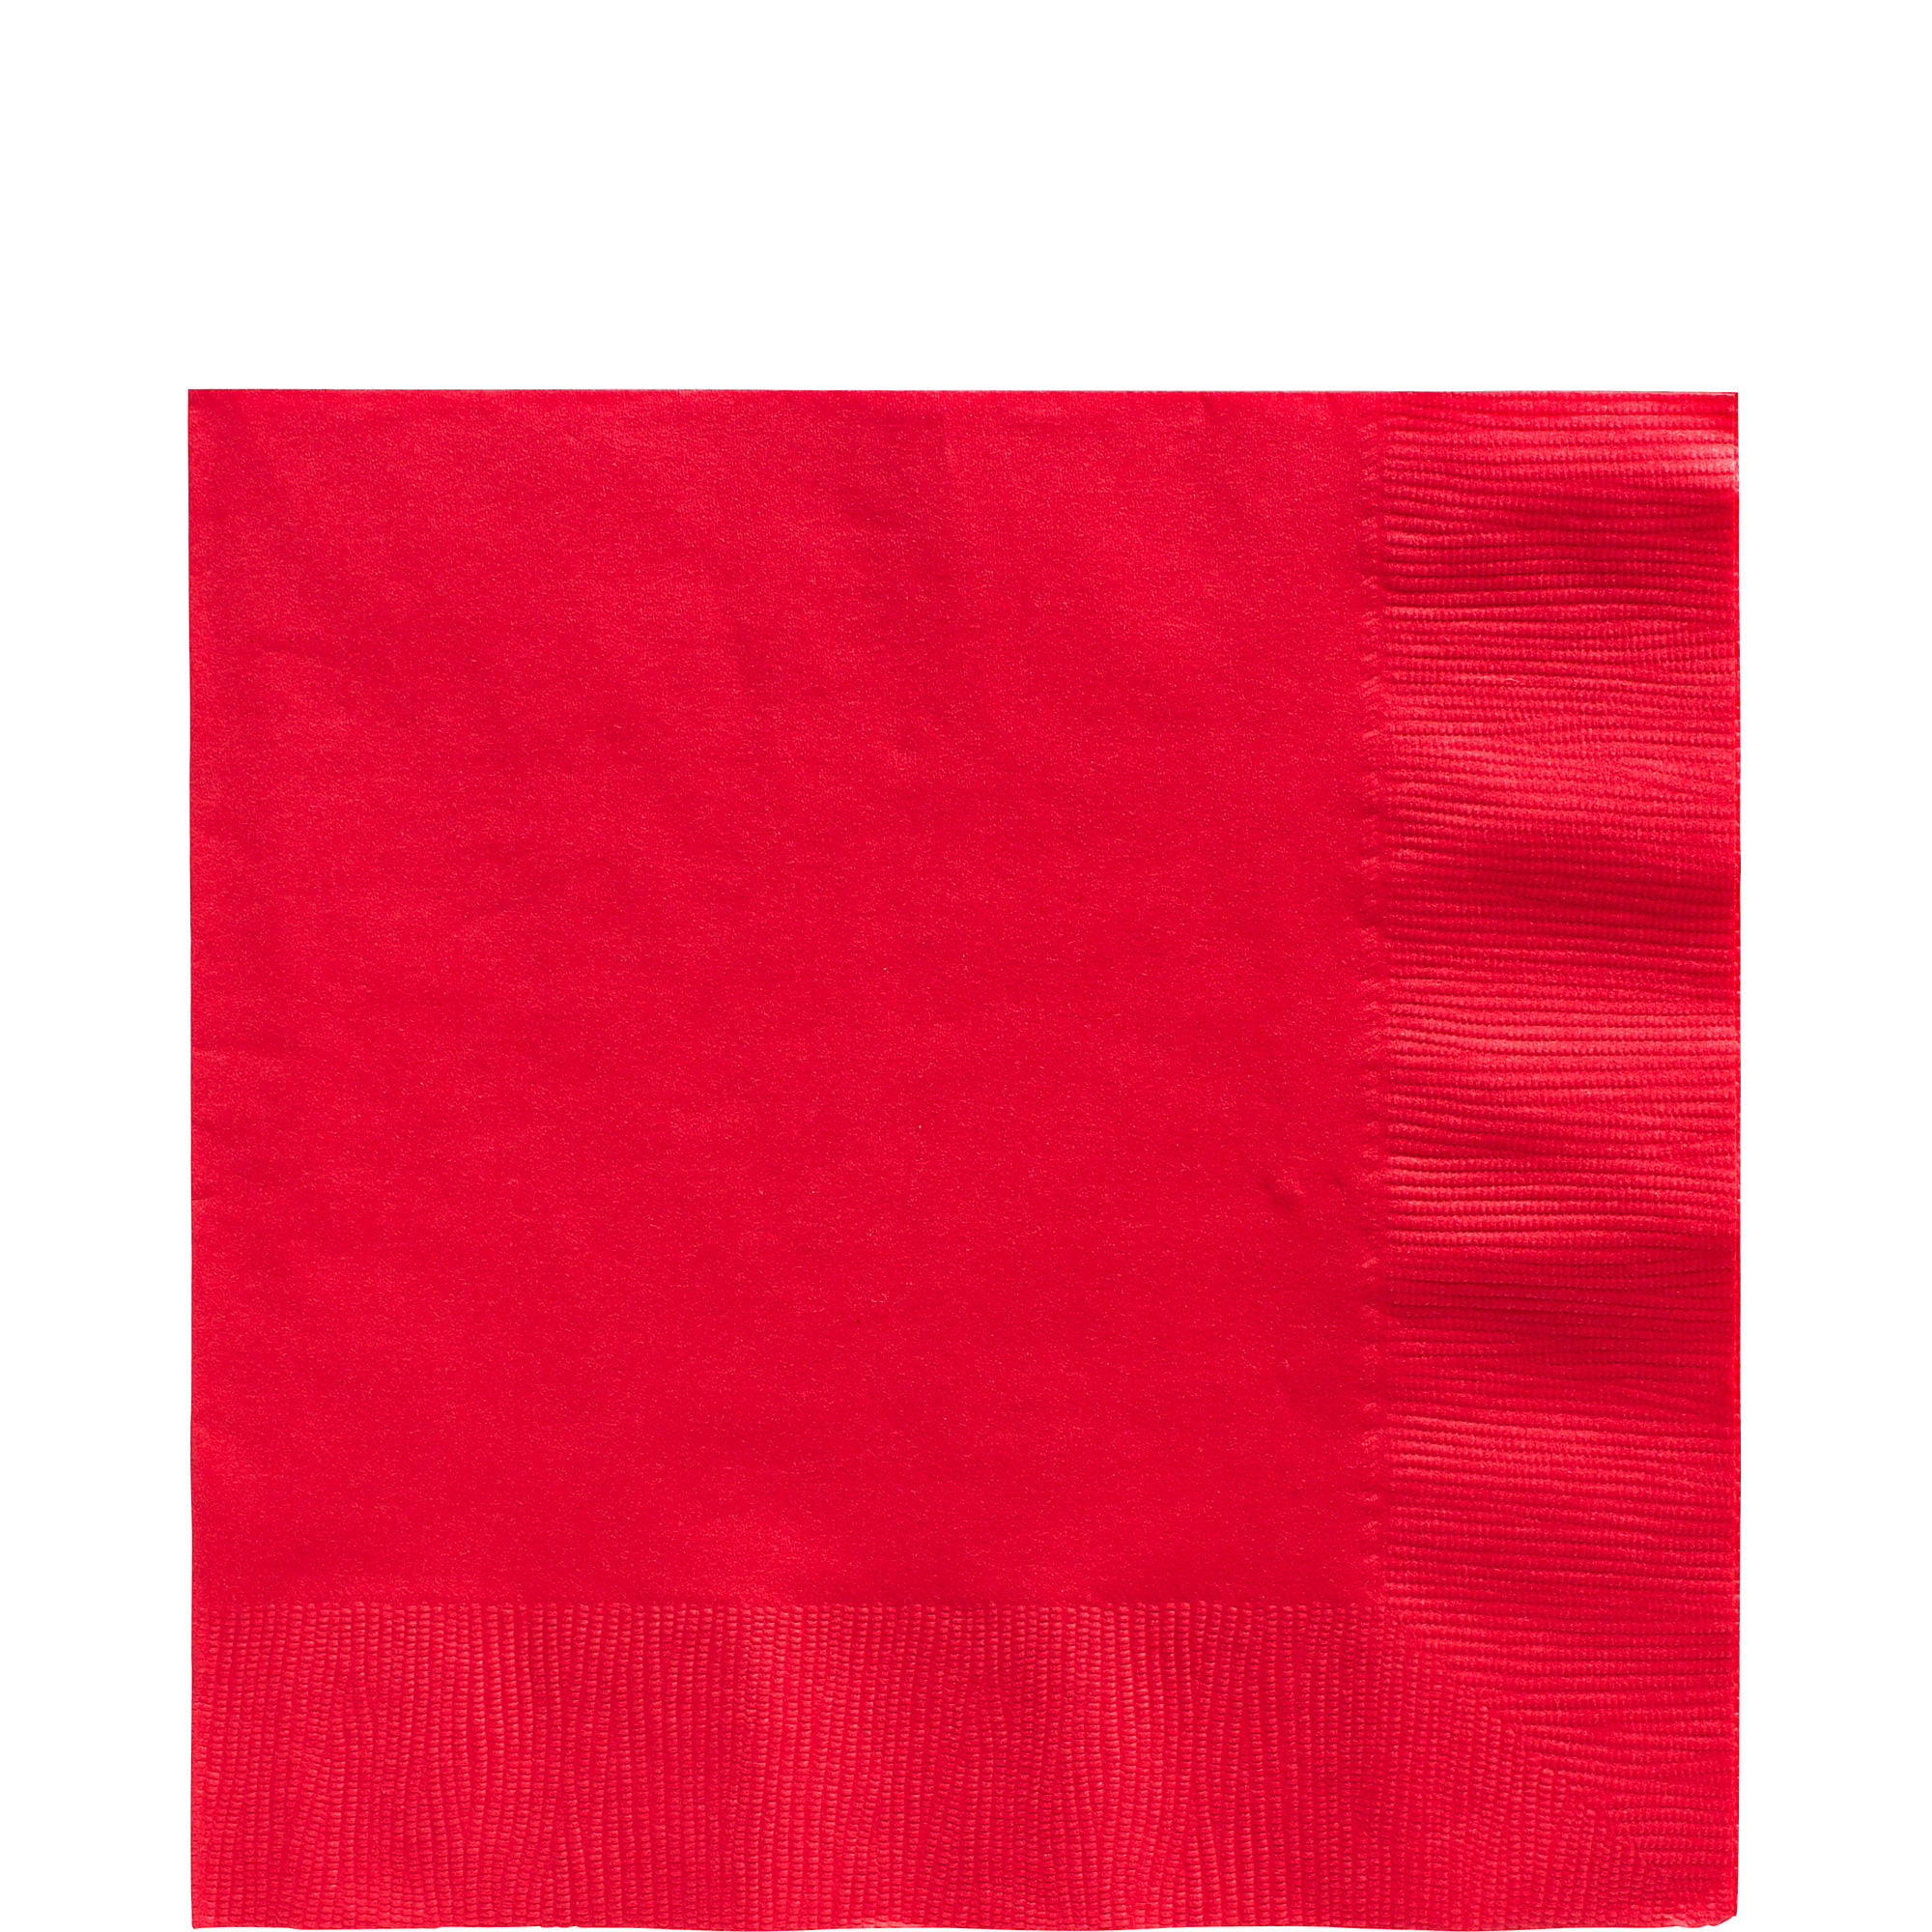 Pack of 50 Amscan 60215.4 Party Perfect Vibrant 2-Ply Beverage Napkins Tableware 5 x 5 paper Apple Red 6.5 x 6.5 